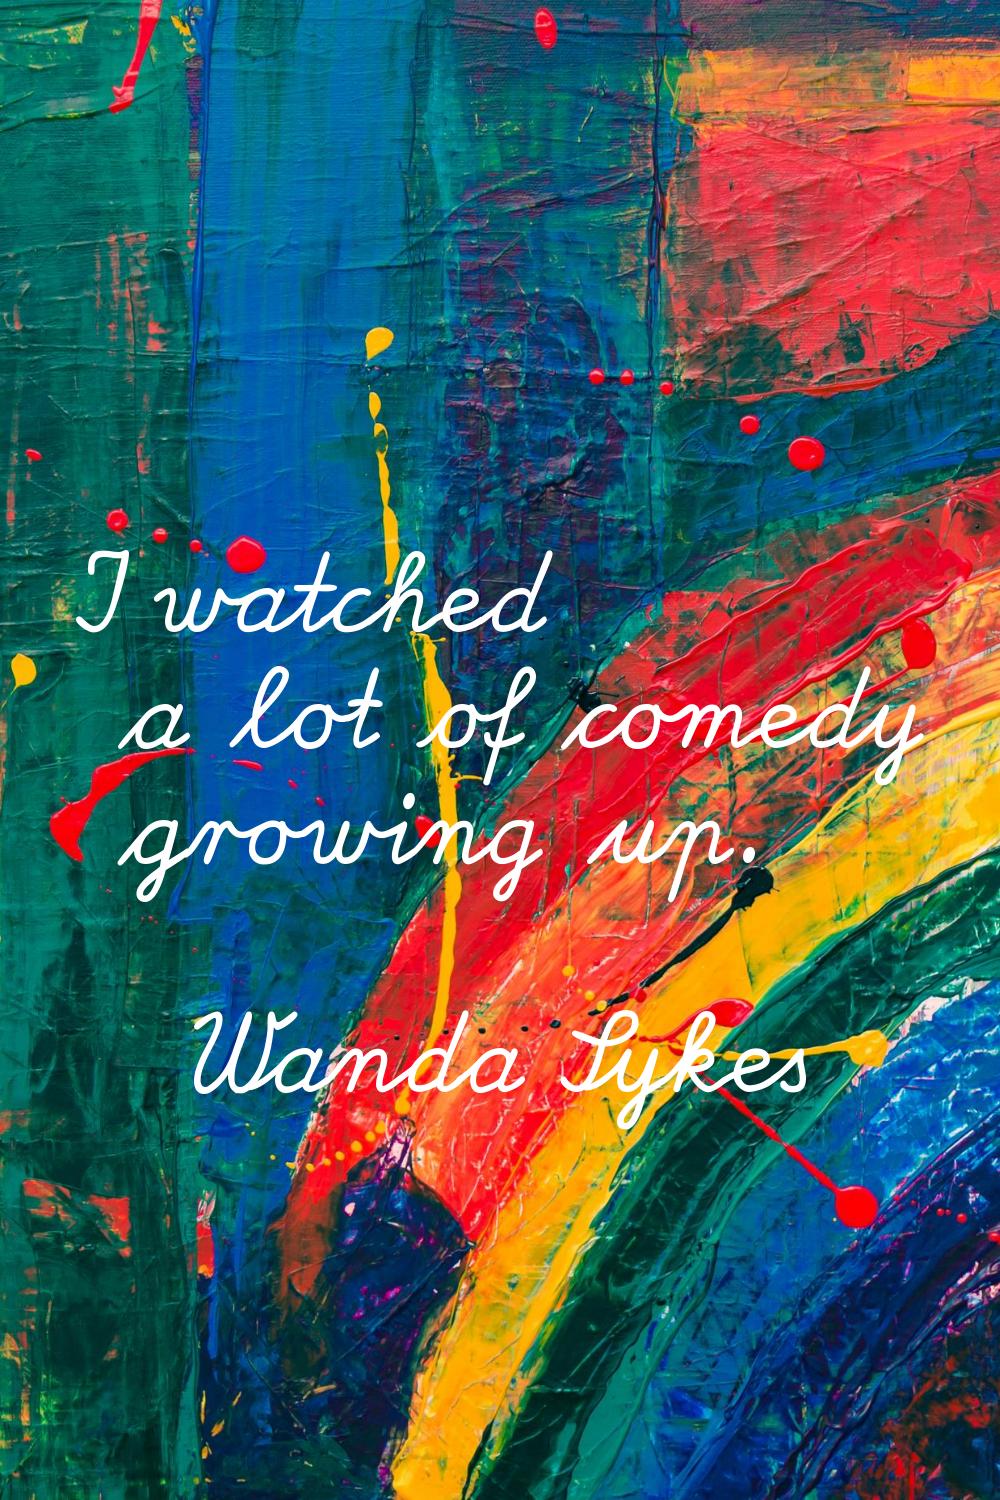 I watched a lot of comedy growing up.